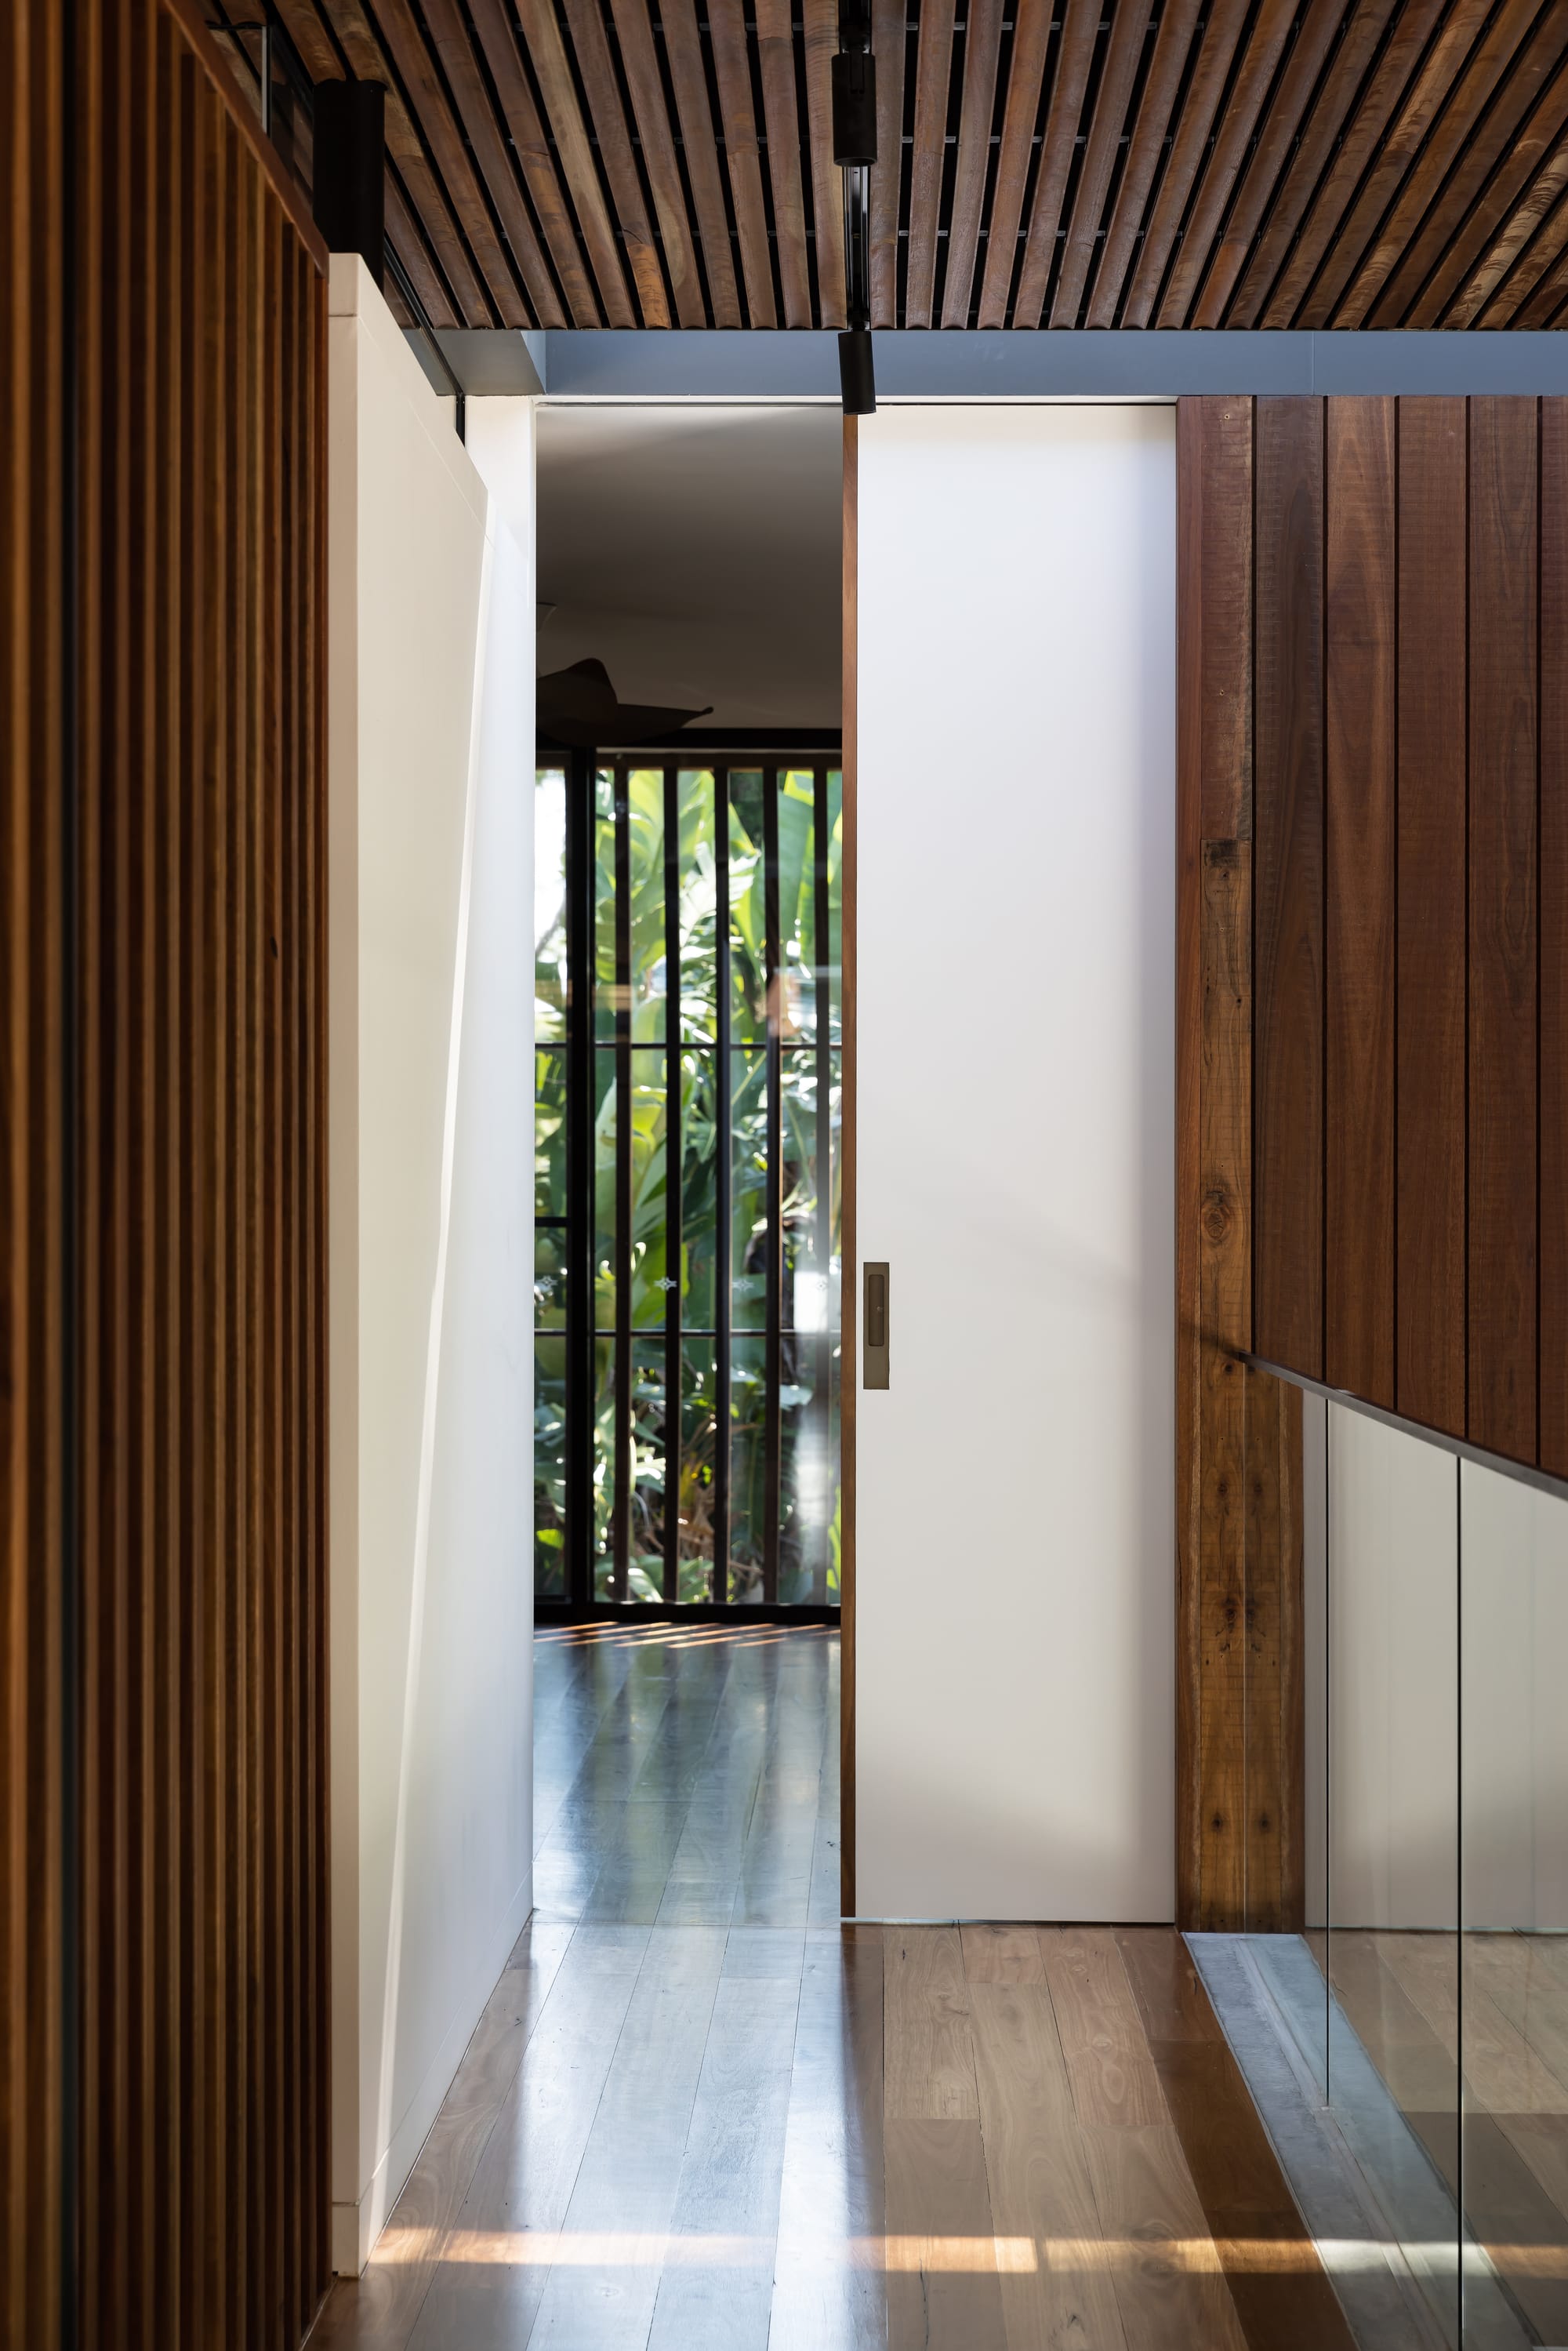 Mortlock Timbers Series: Fox Valley House. Photography by Simon Whitbread. Hallway with timber flooring, walls and ceiling. White door opening into room with garden views. Glass balcony fence.